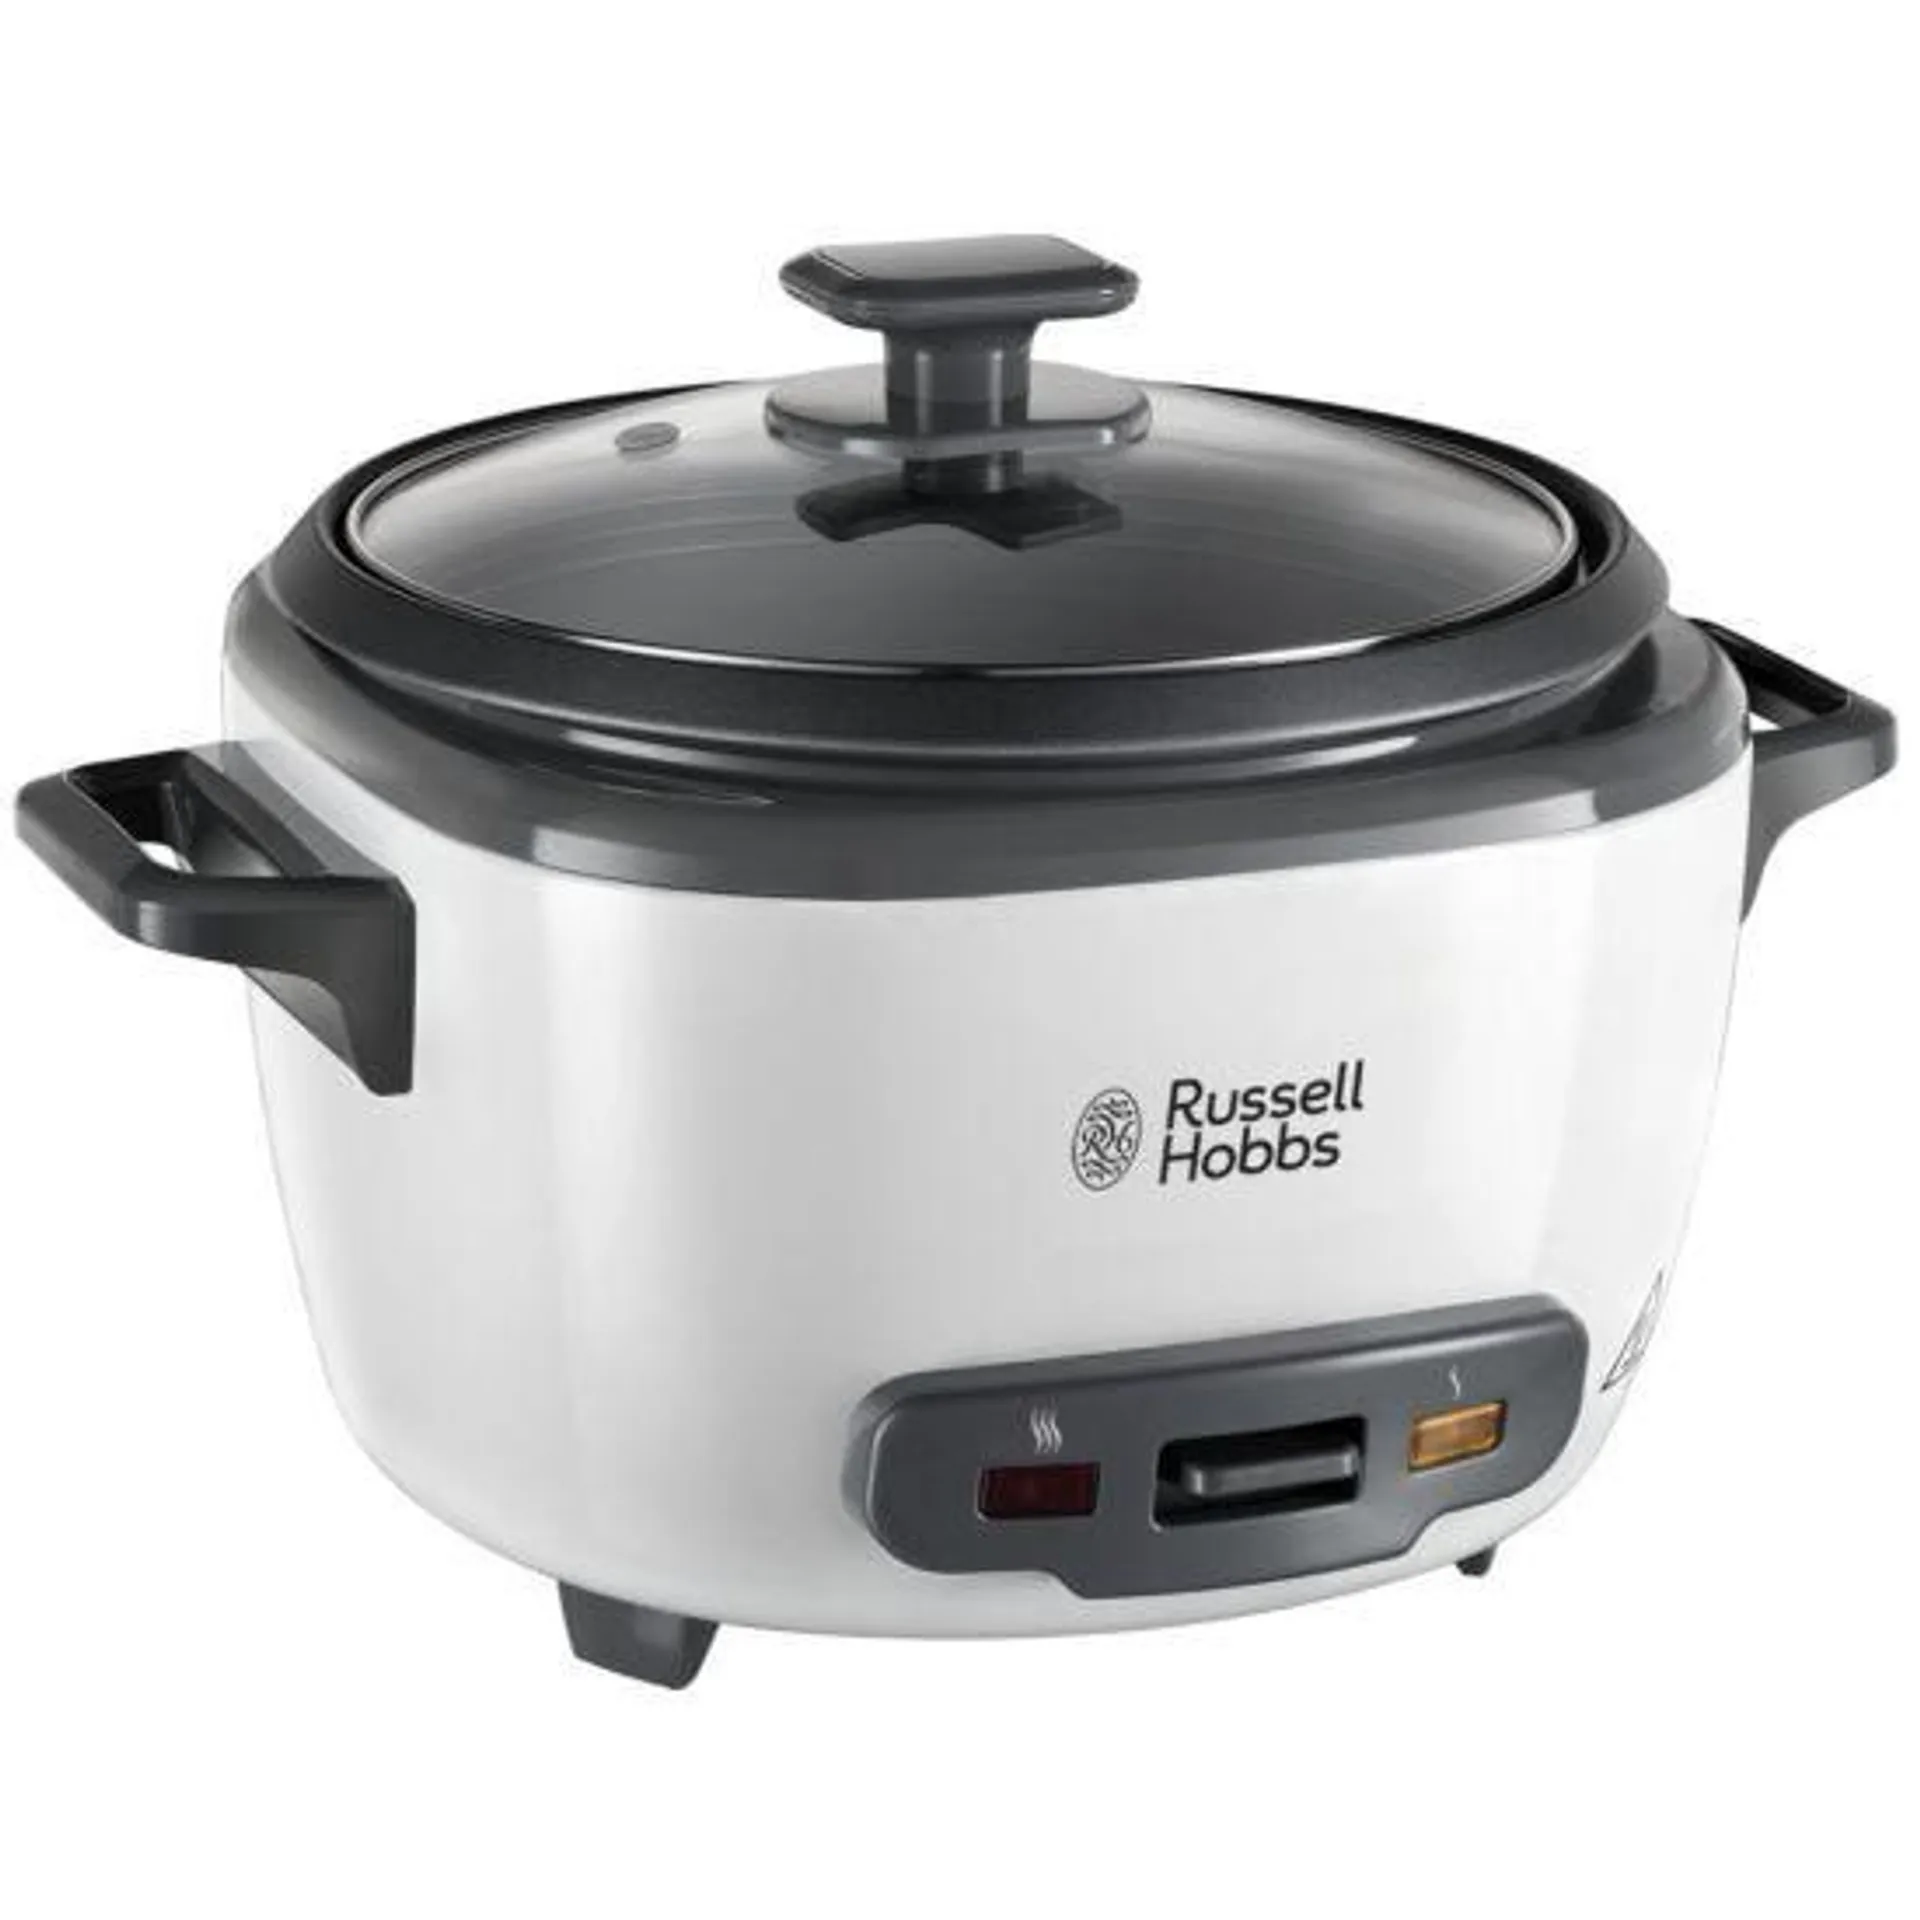 Russell Hobbs 27040 2.8L Large Rice Cooker - Black & White